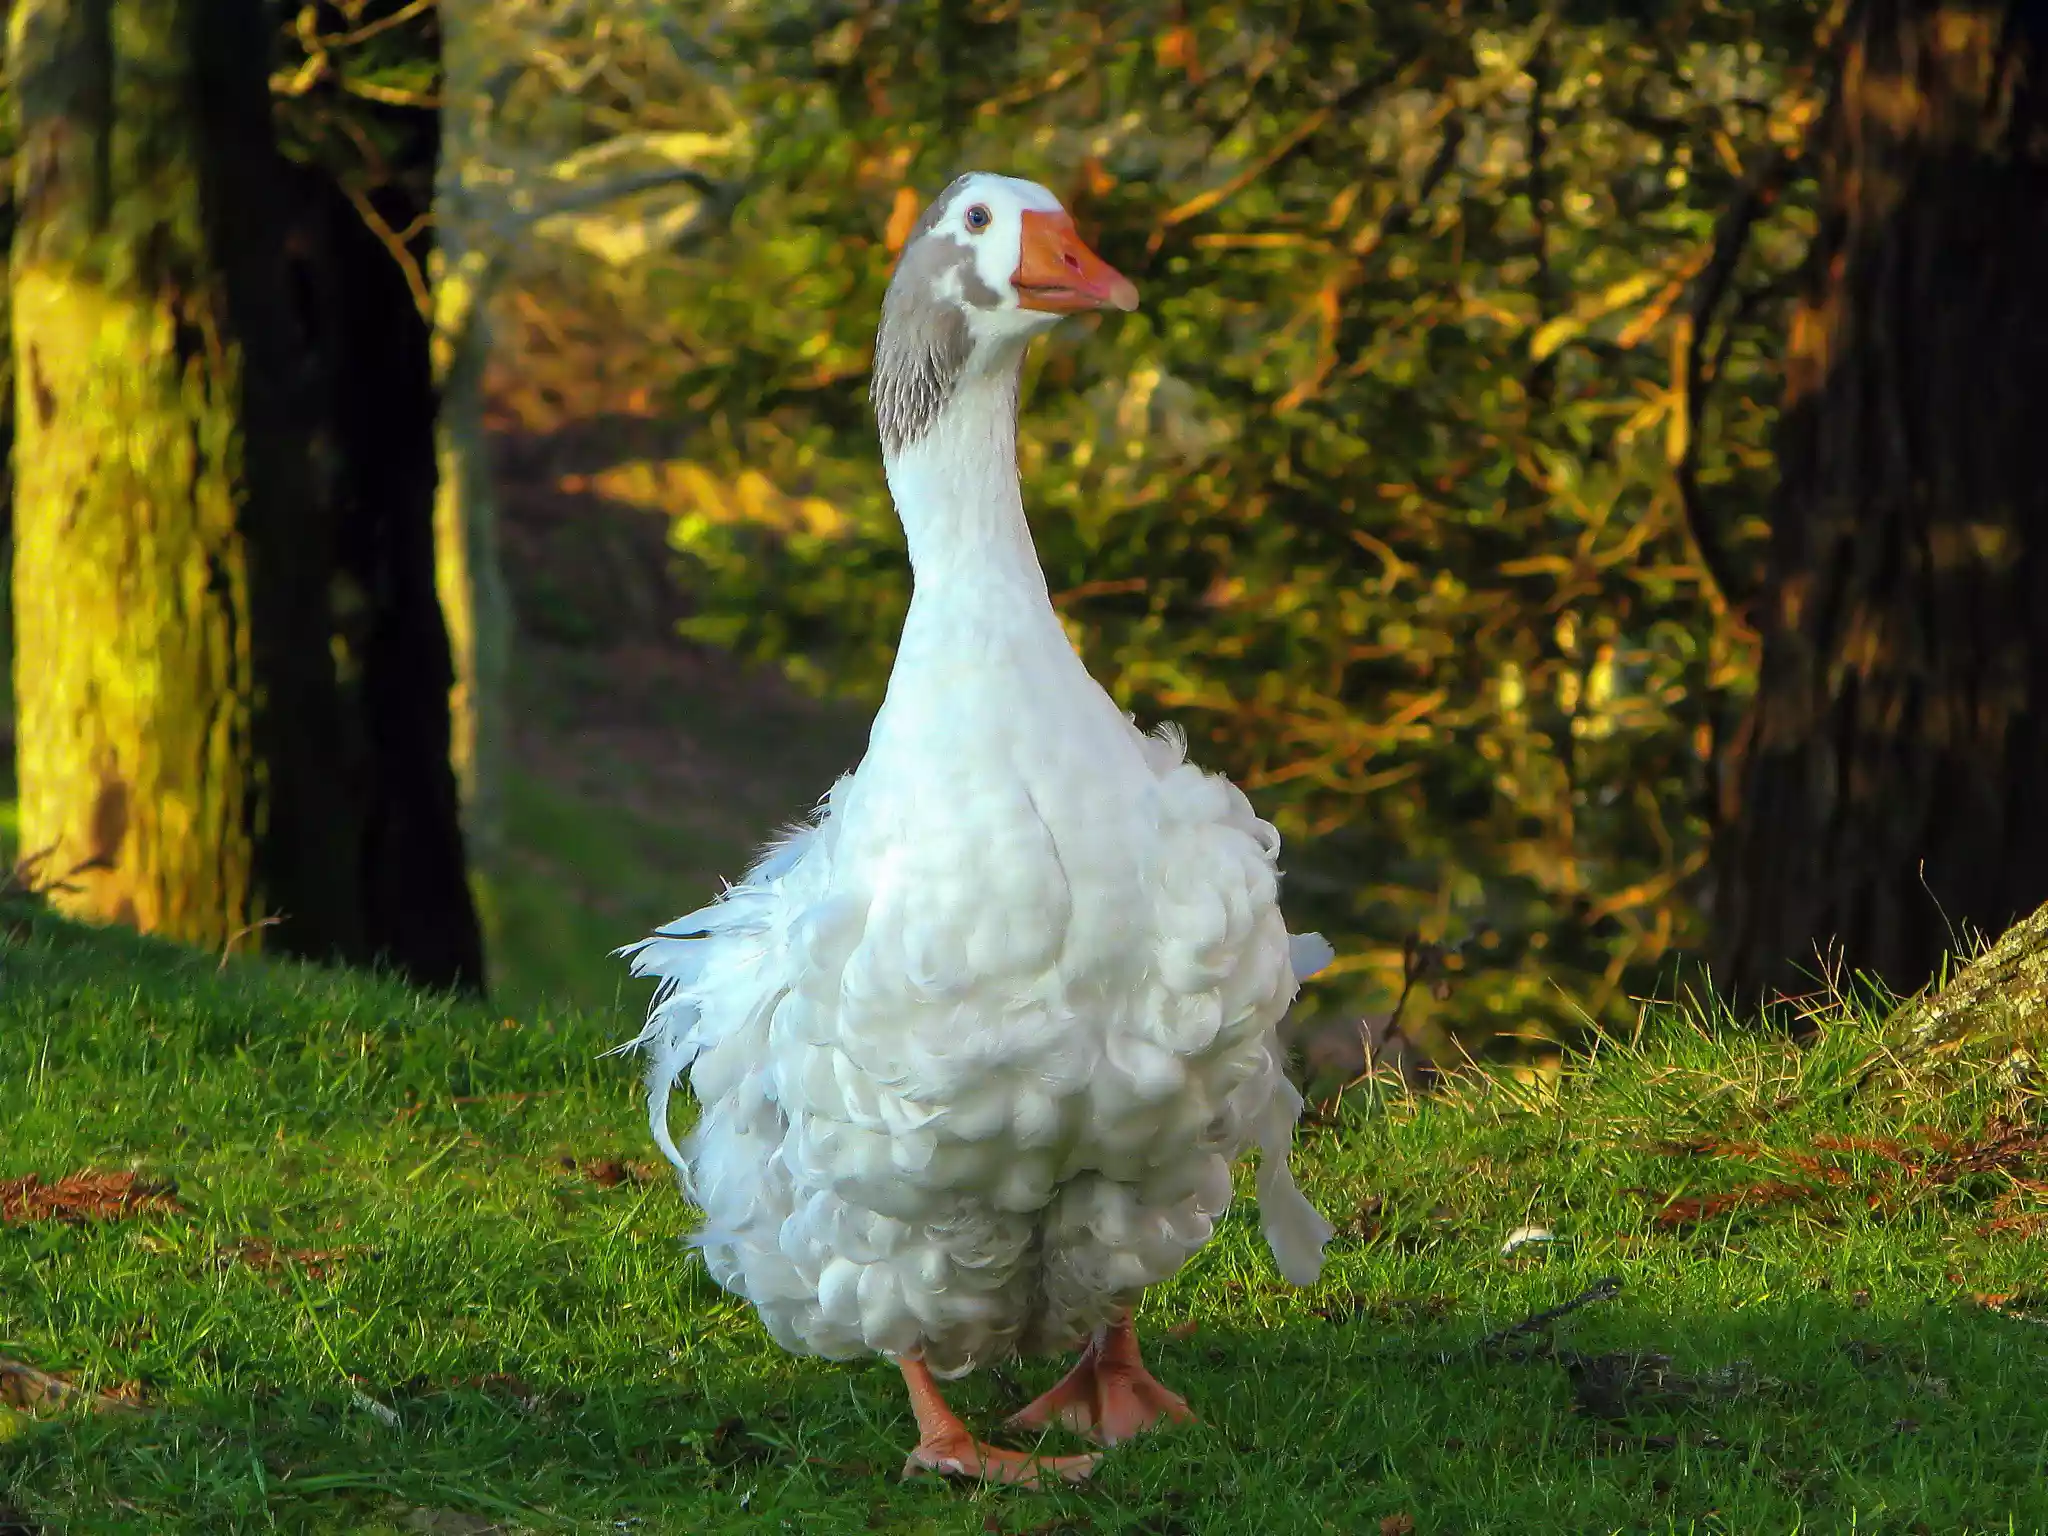 A white Sebastopol goose walking on the grass with a forest in the background